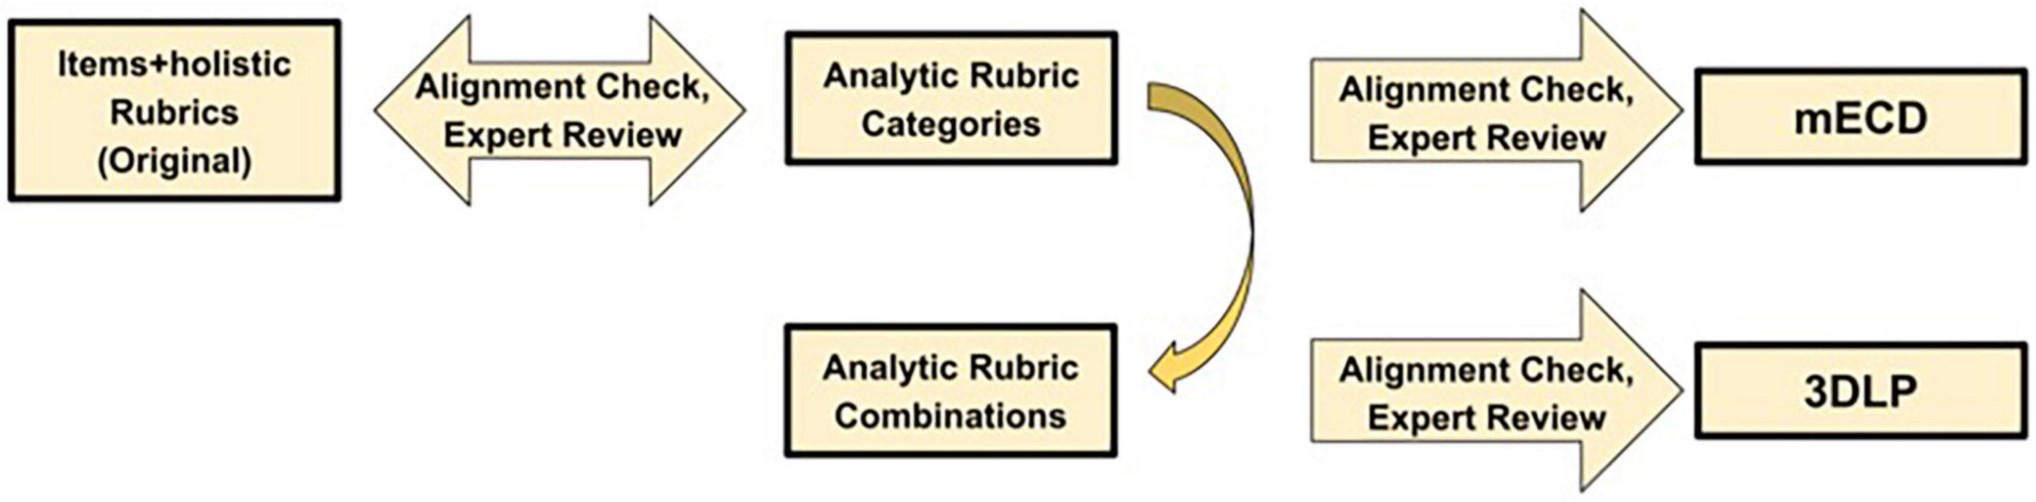 A diagram to display the rubric creation process